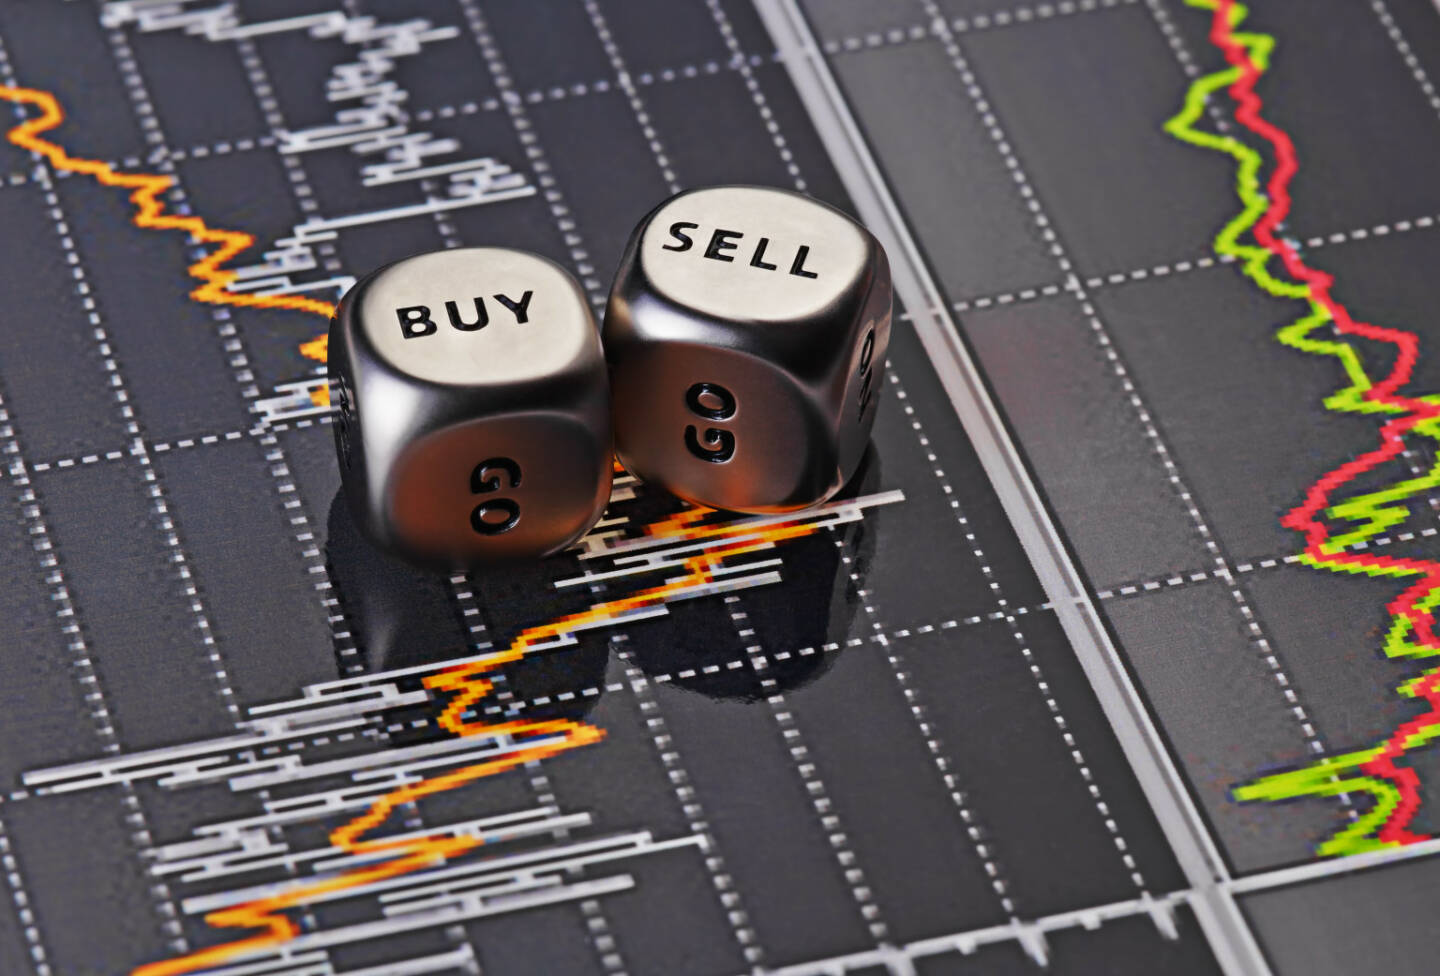 Buy, Sell, Aktien, Handeln, Trade, Kurs http://www.shutterstock.com/de/pic-132837878/stock-photo-dices-cubes-to-trader-cubes-with-the-words-sell-buy-on-financial-chart-as-background-selective.html